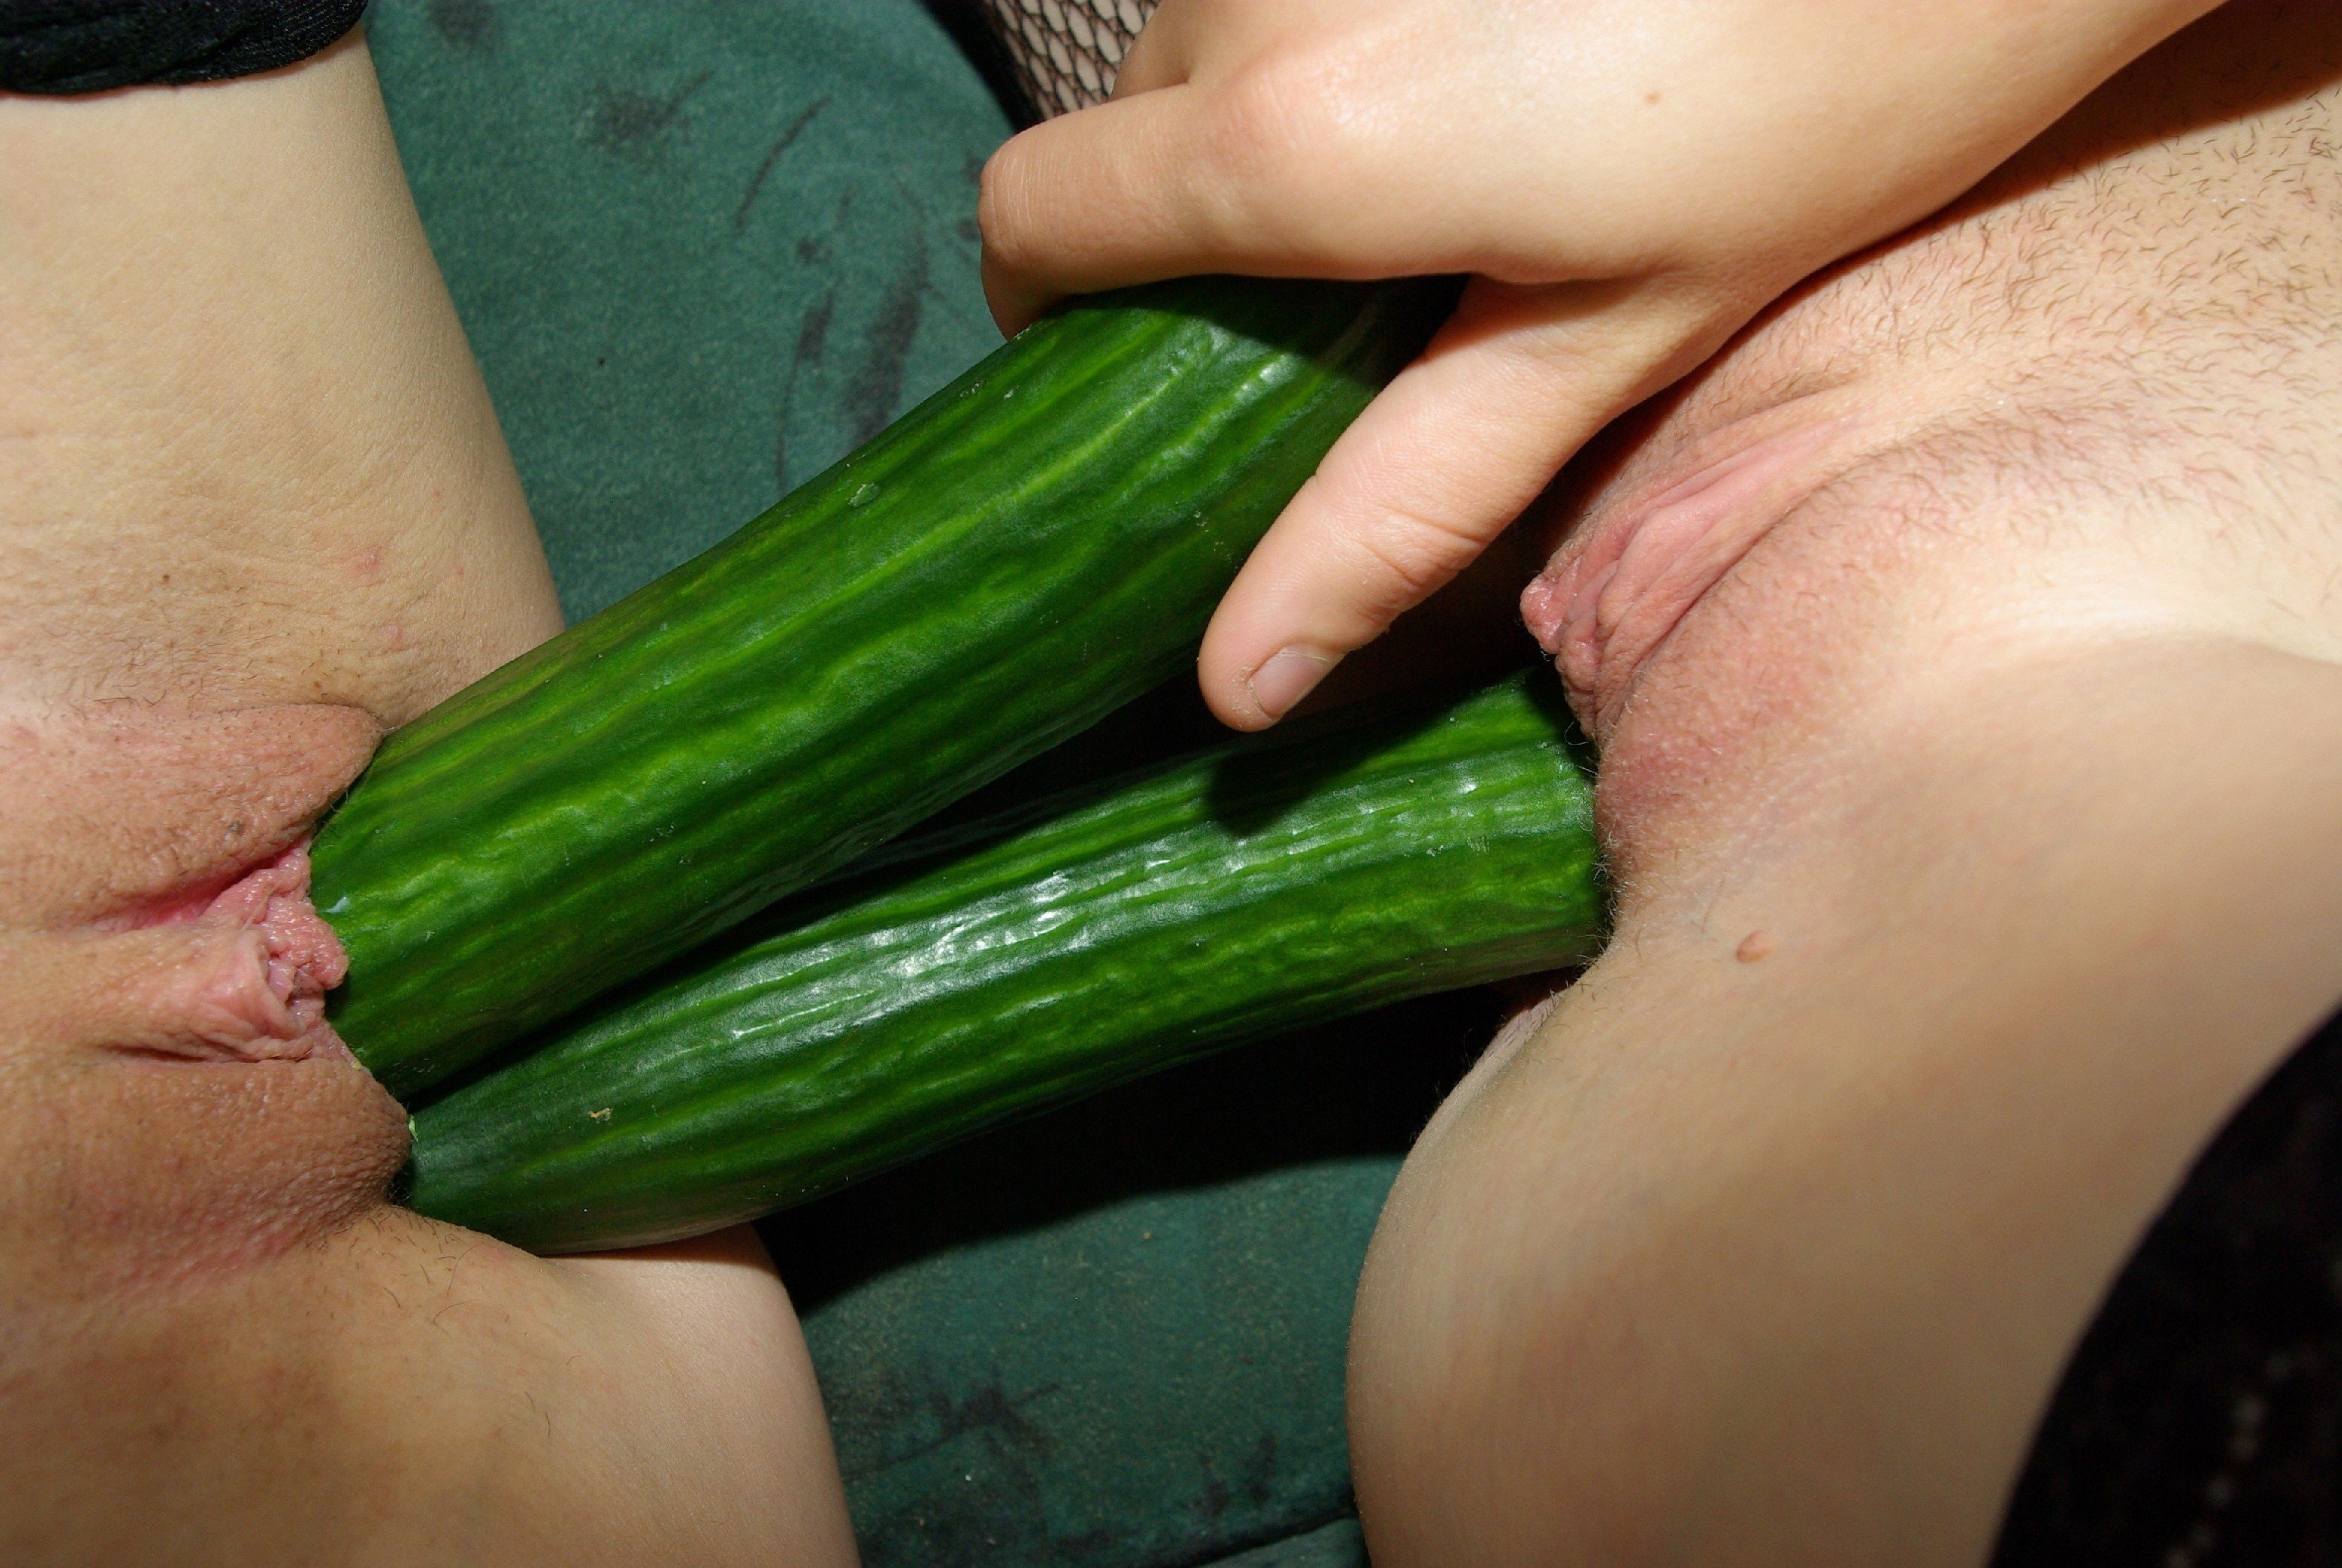 Two cucumbers in pussy image